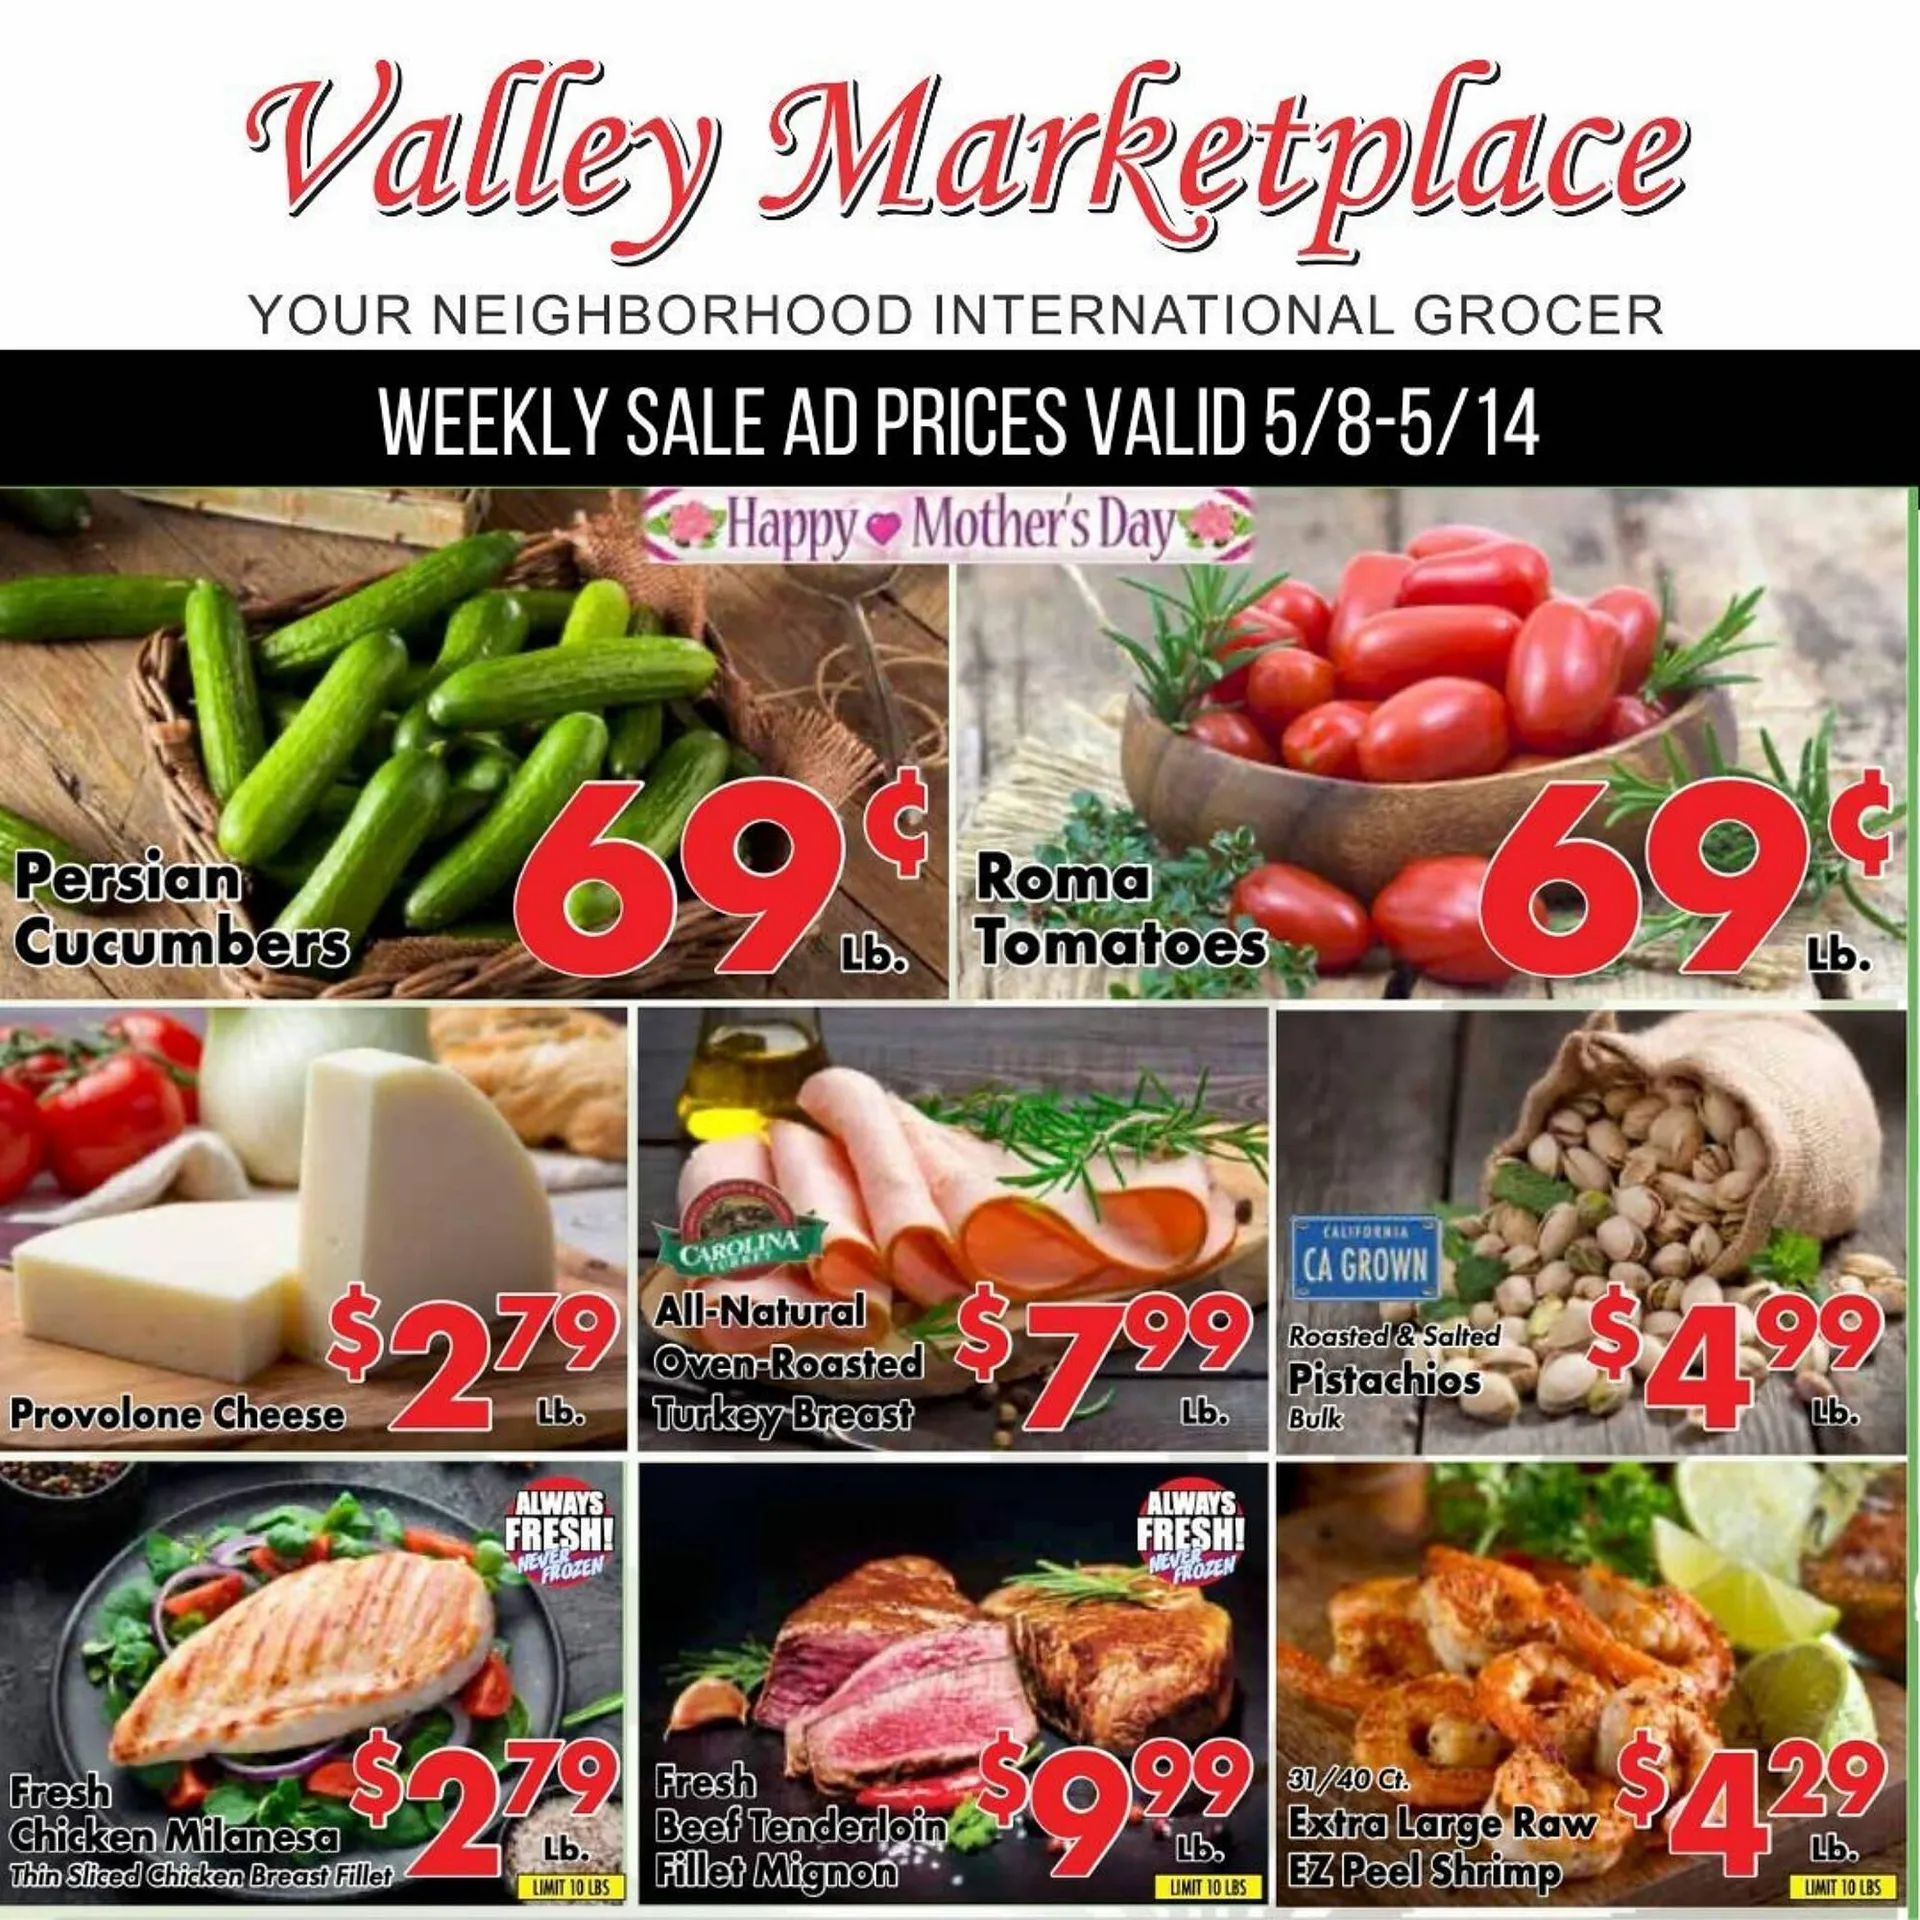 Valley Marketplace ad - 1